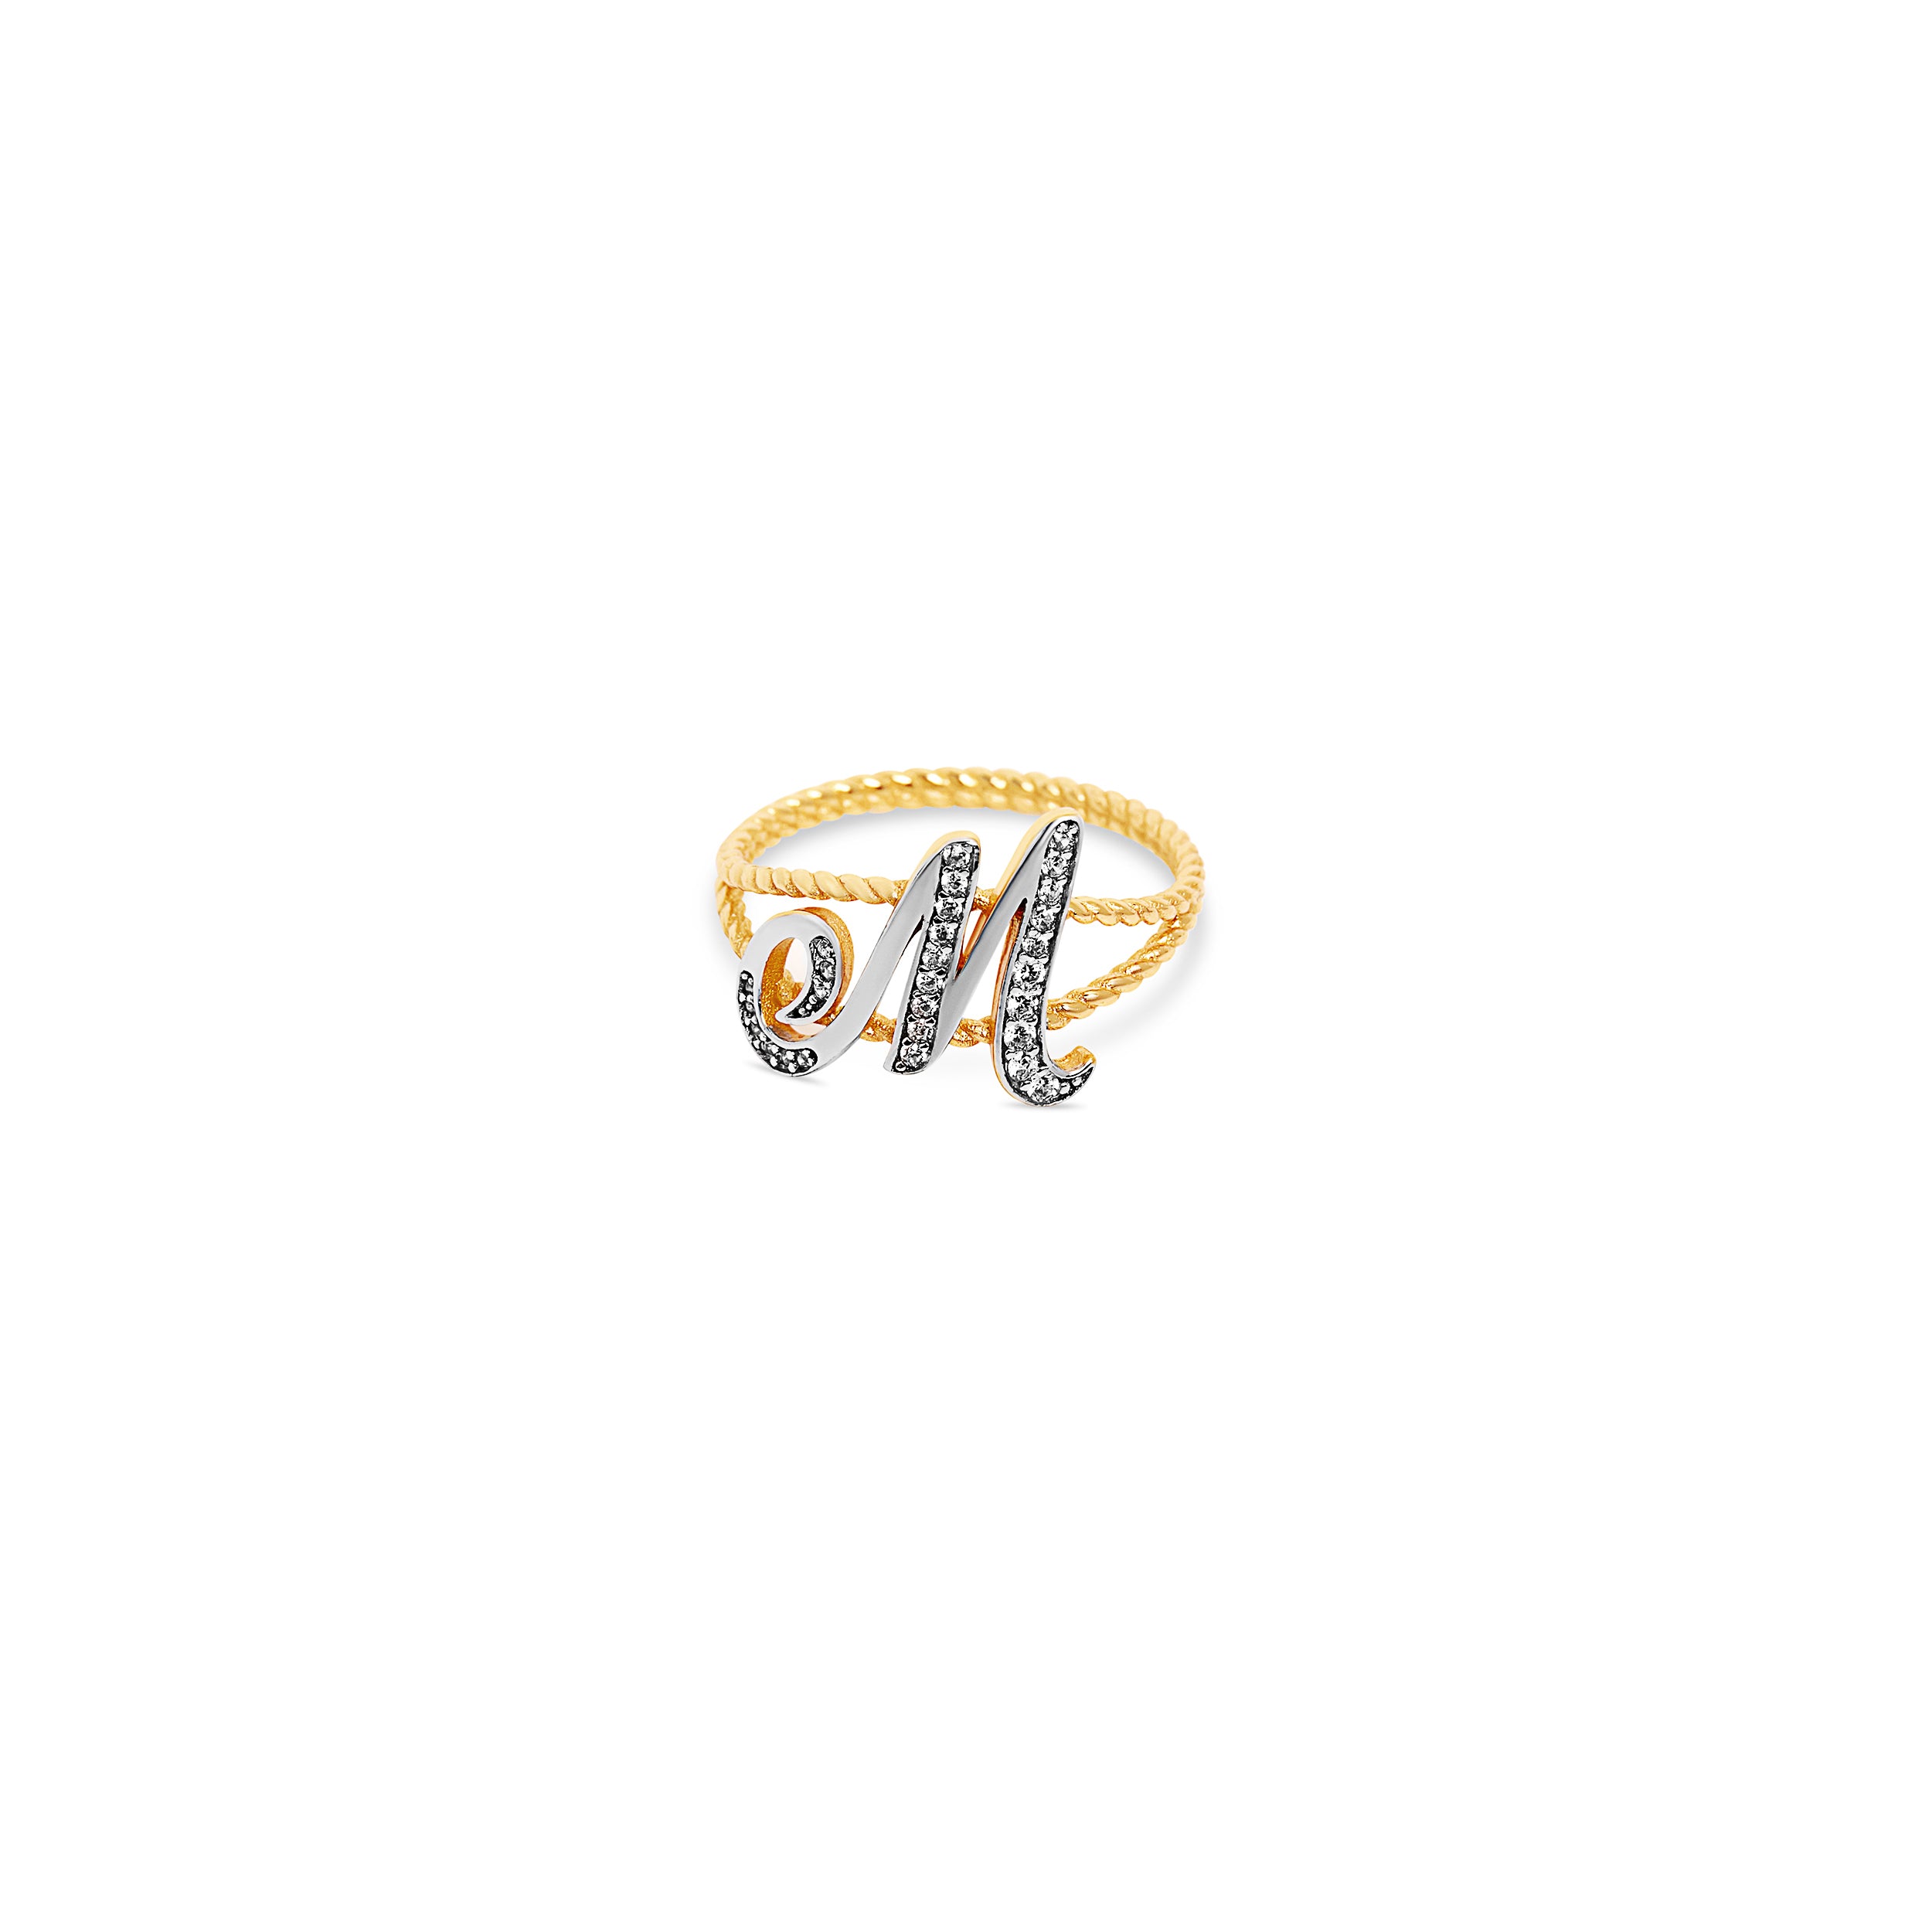 THE SCRIPT LETTER ROPE RING